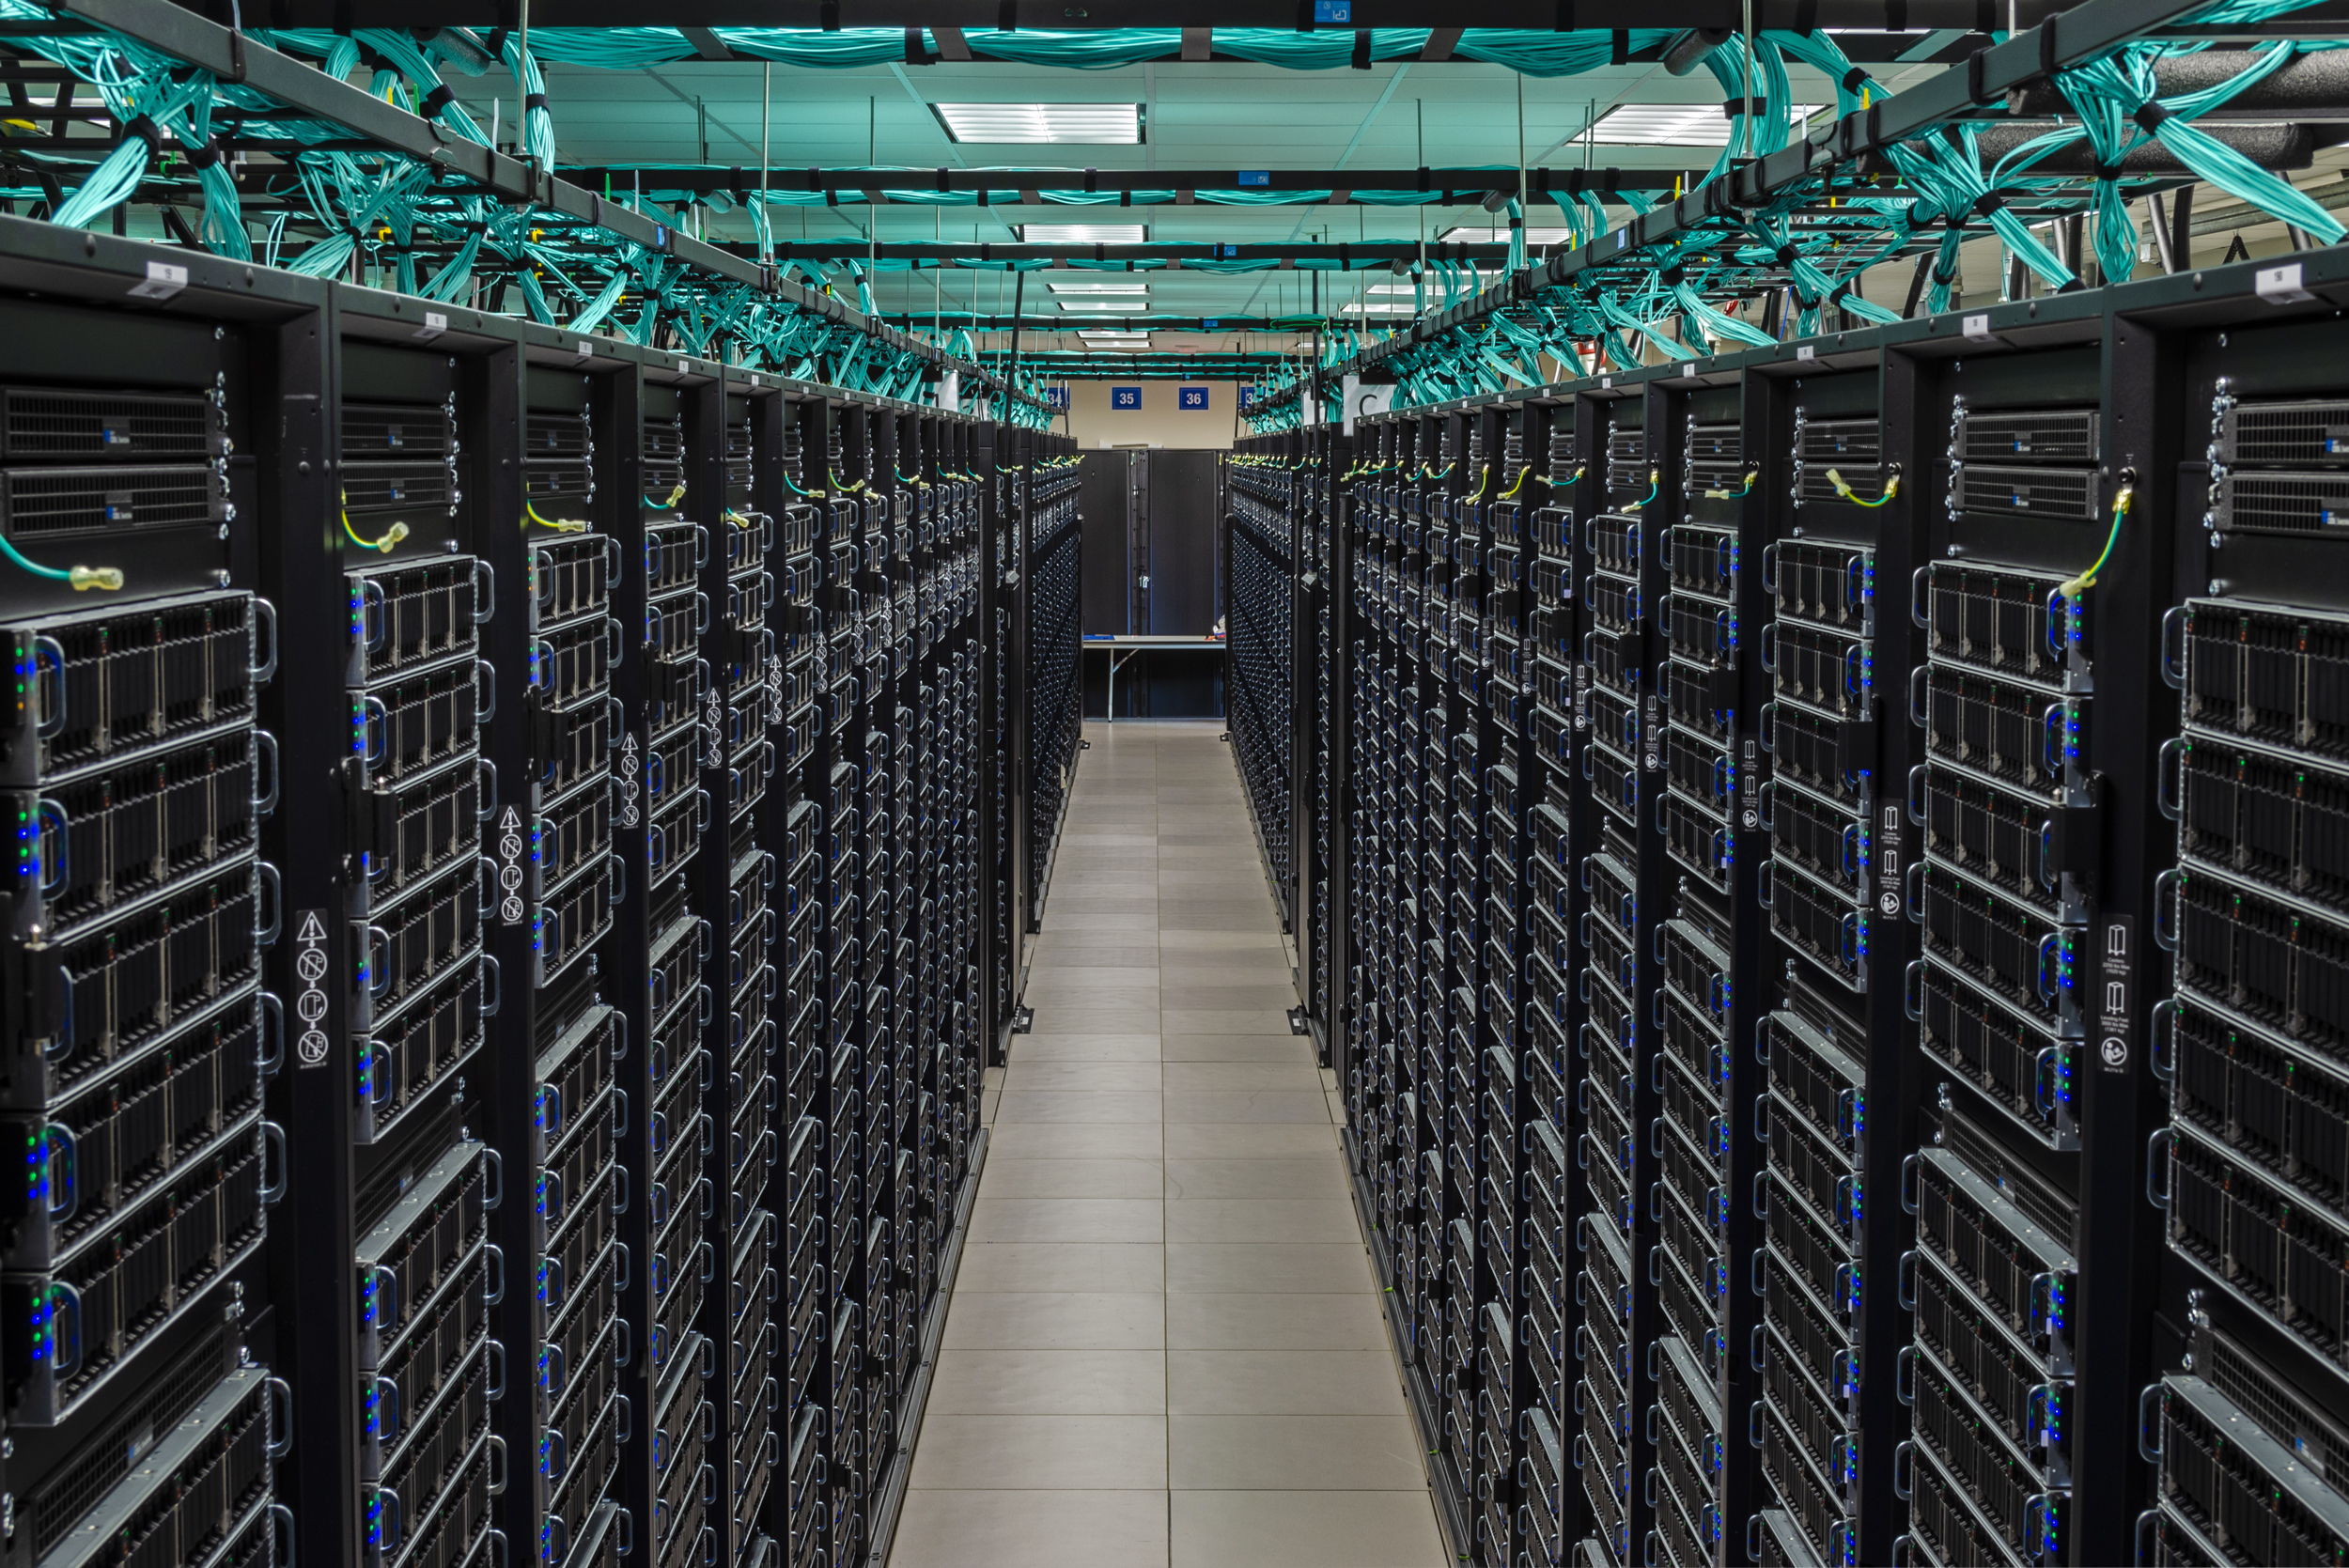 Frontera is one of the world's fastest academic supercomputers. Credit: TACC